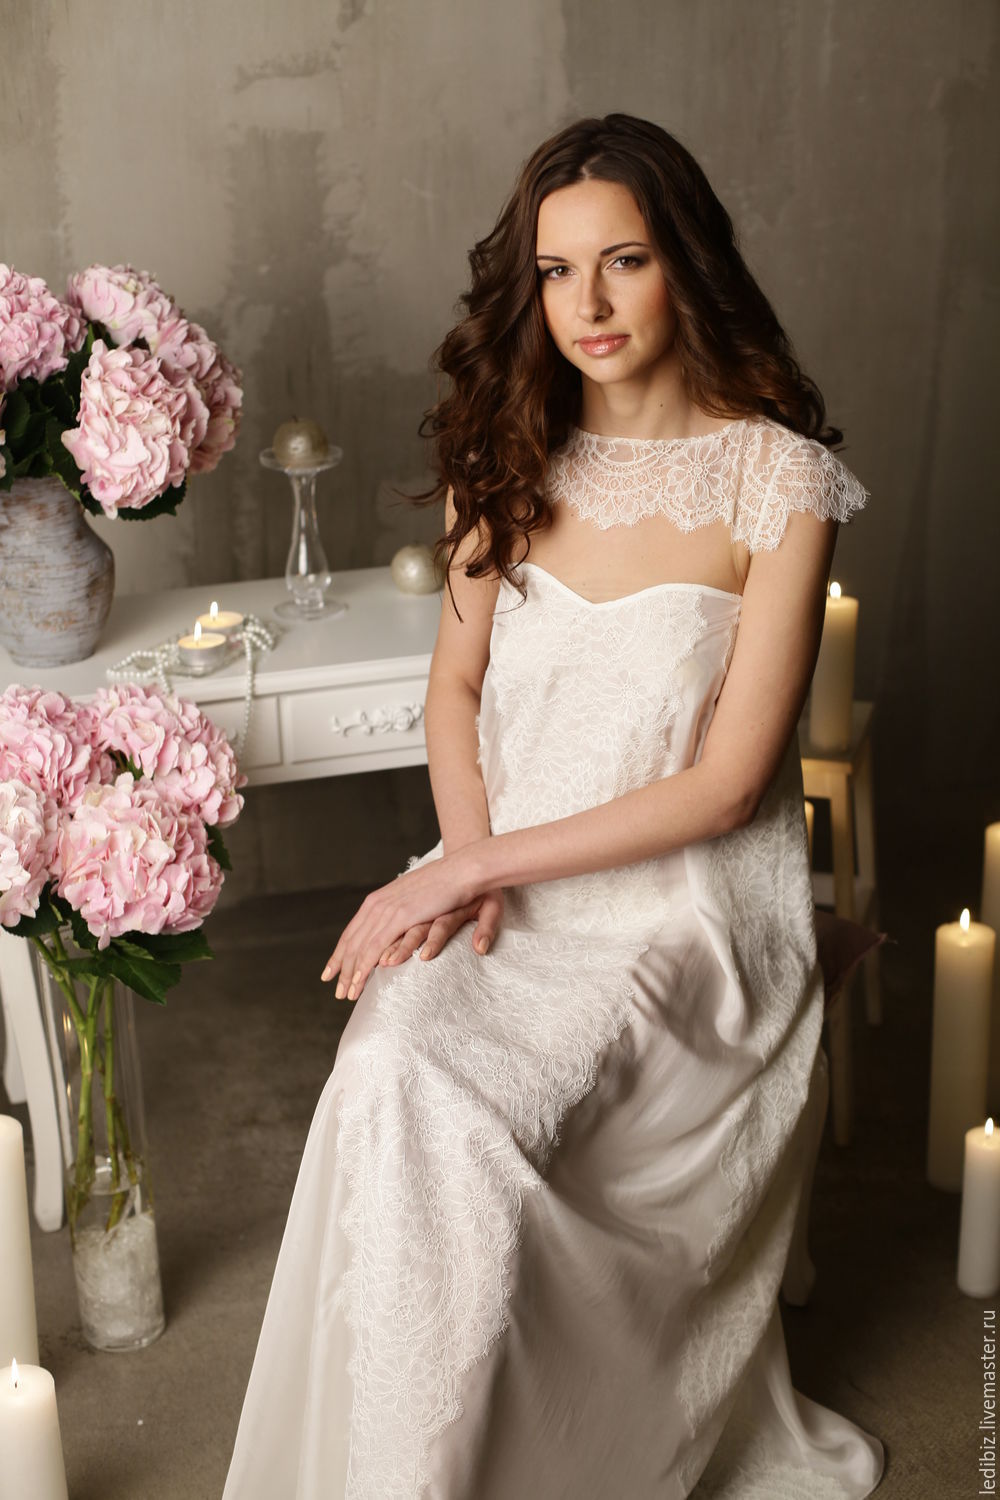 Long Silk Bridal Nightgown With Lace F2 Bridal Lingerie – Shop Online